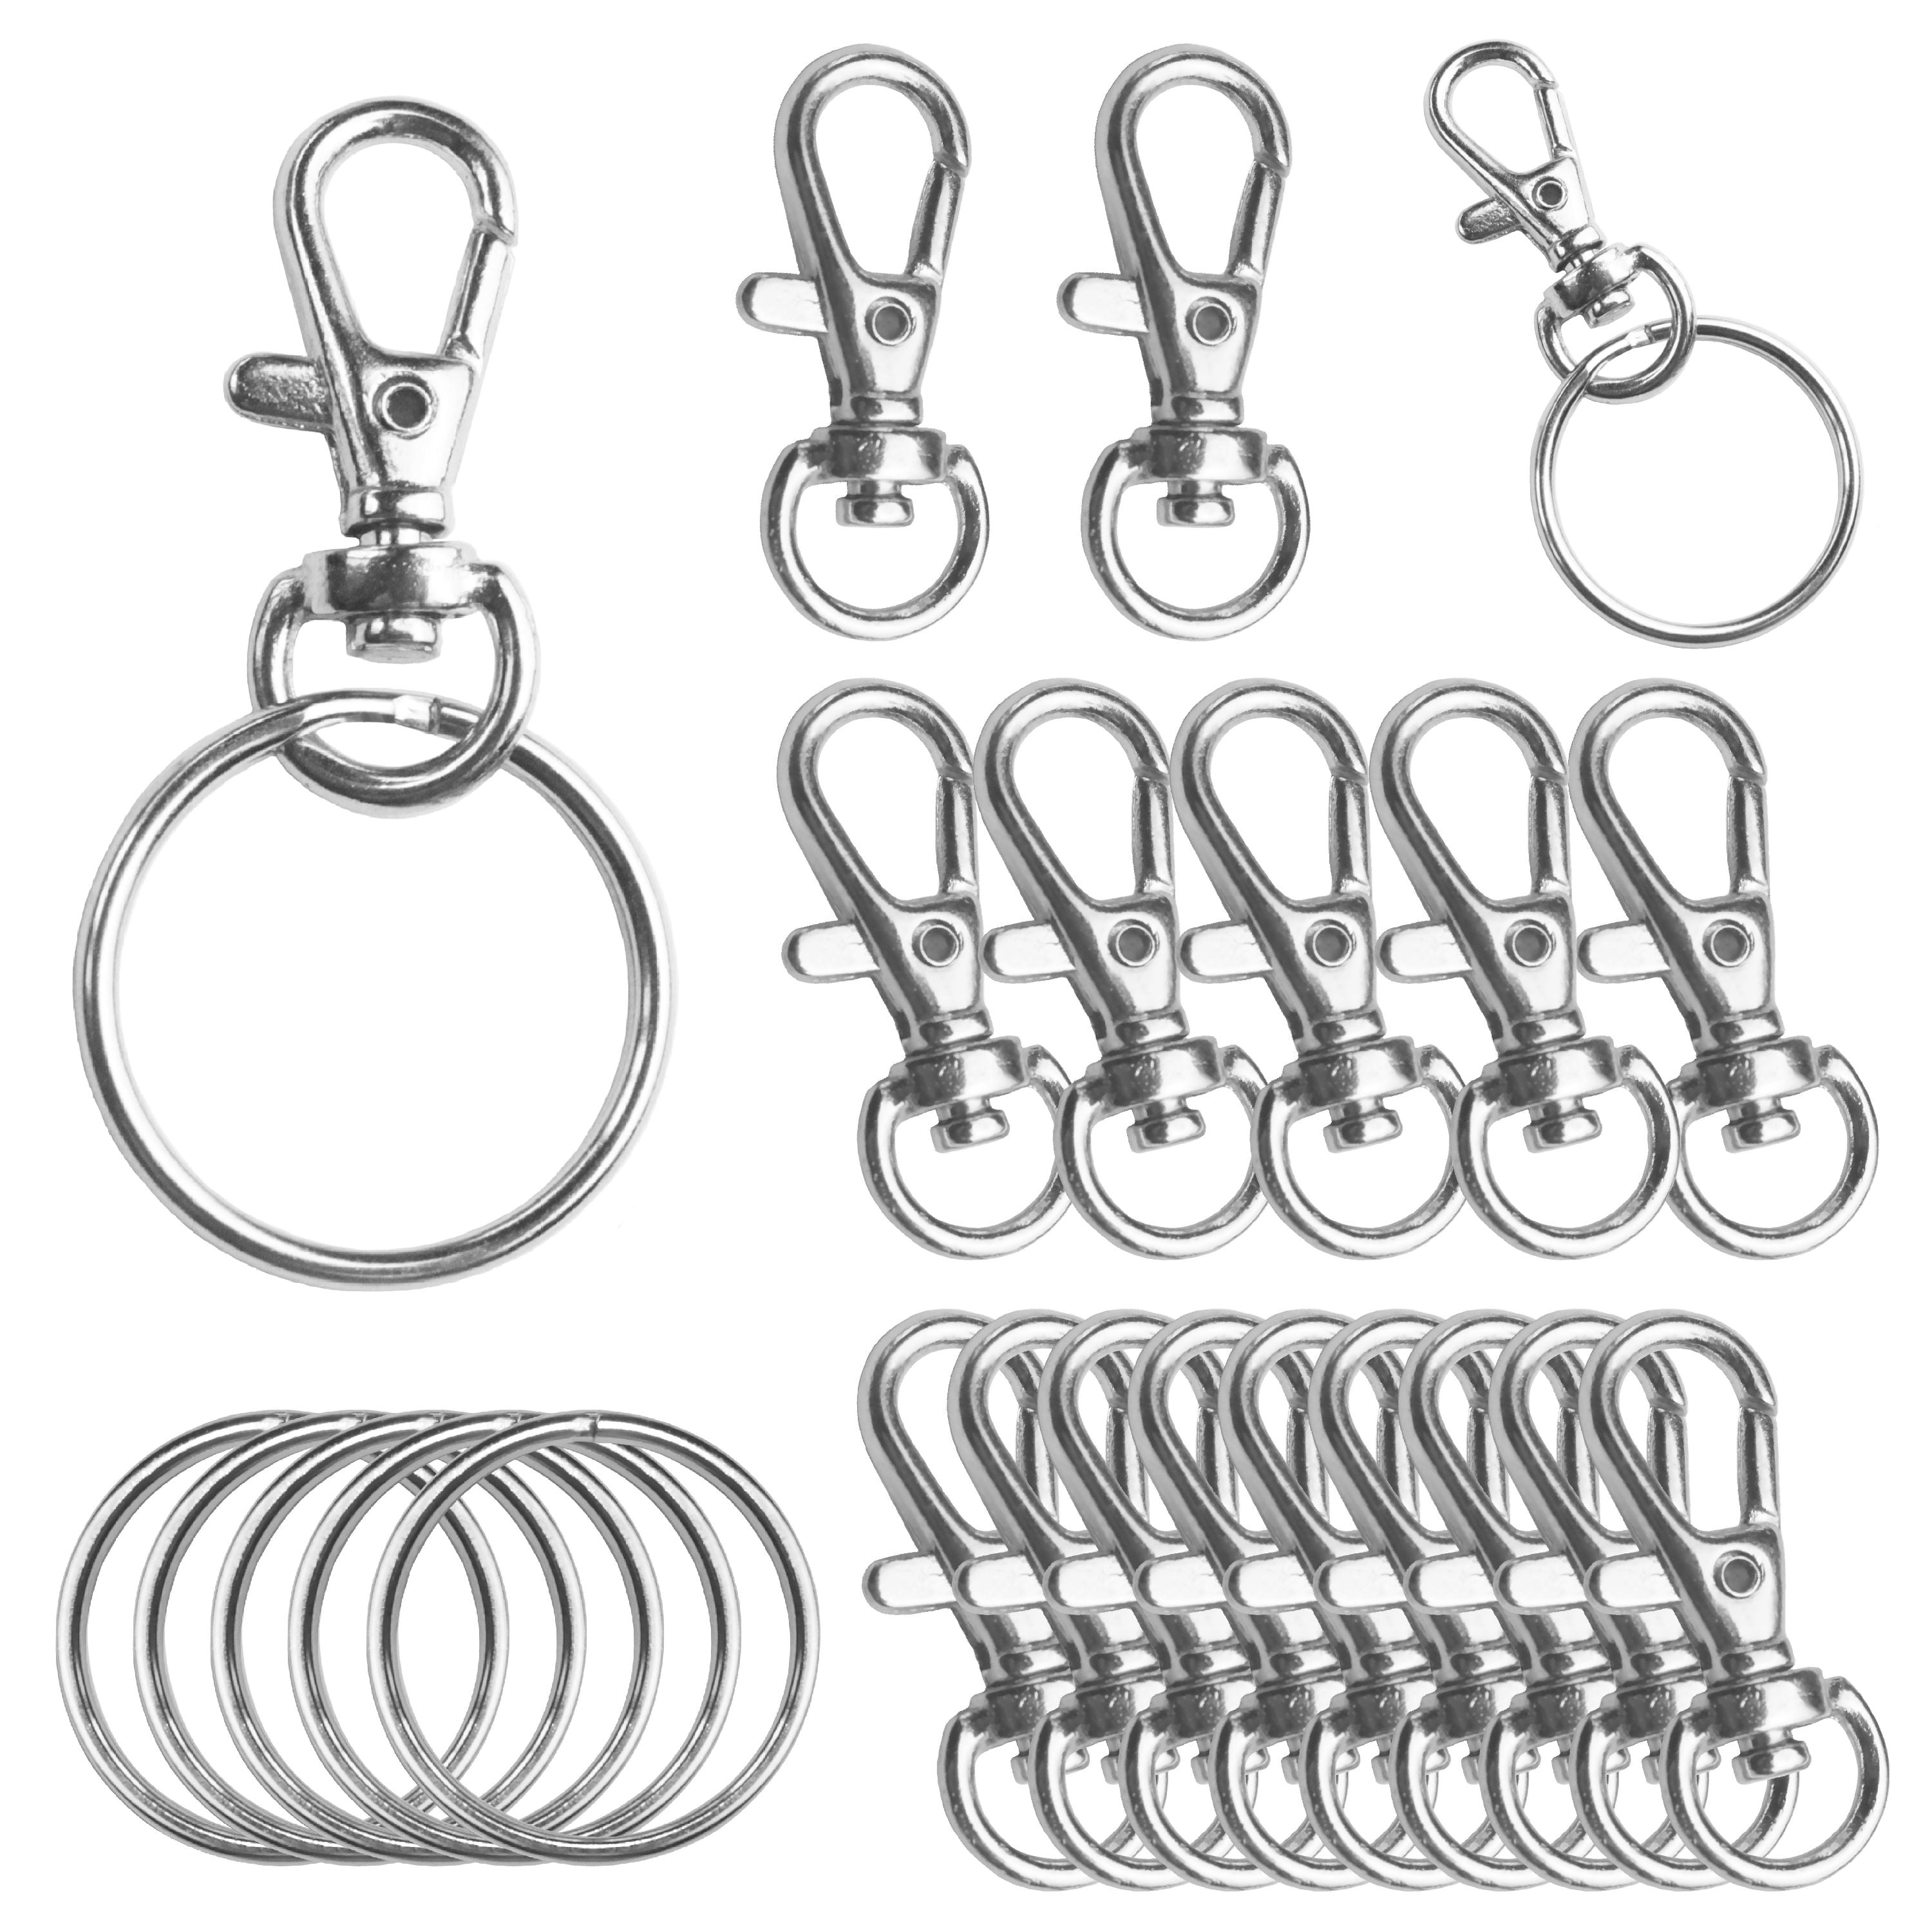 5/10 Metal Lobster Claw Clasps Swivel Lanyards Trigger Hooks for Keychain Bag US 